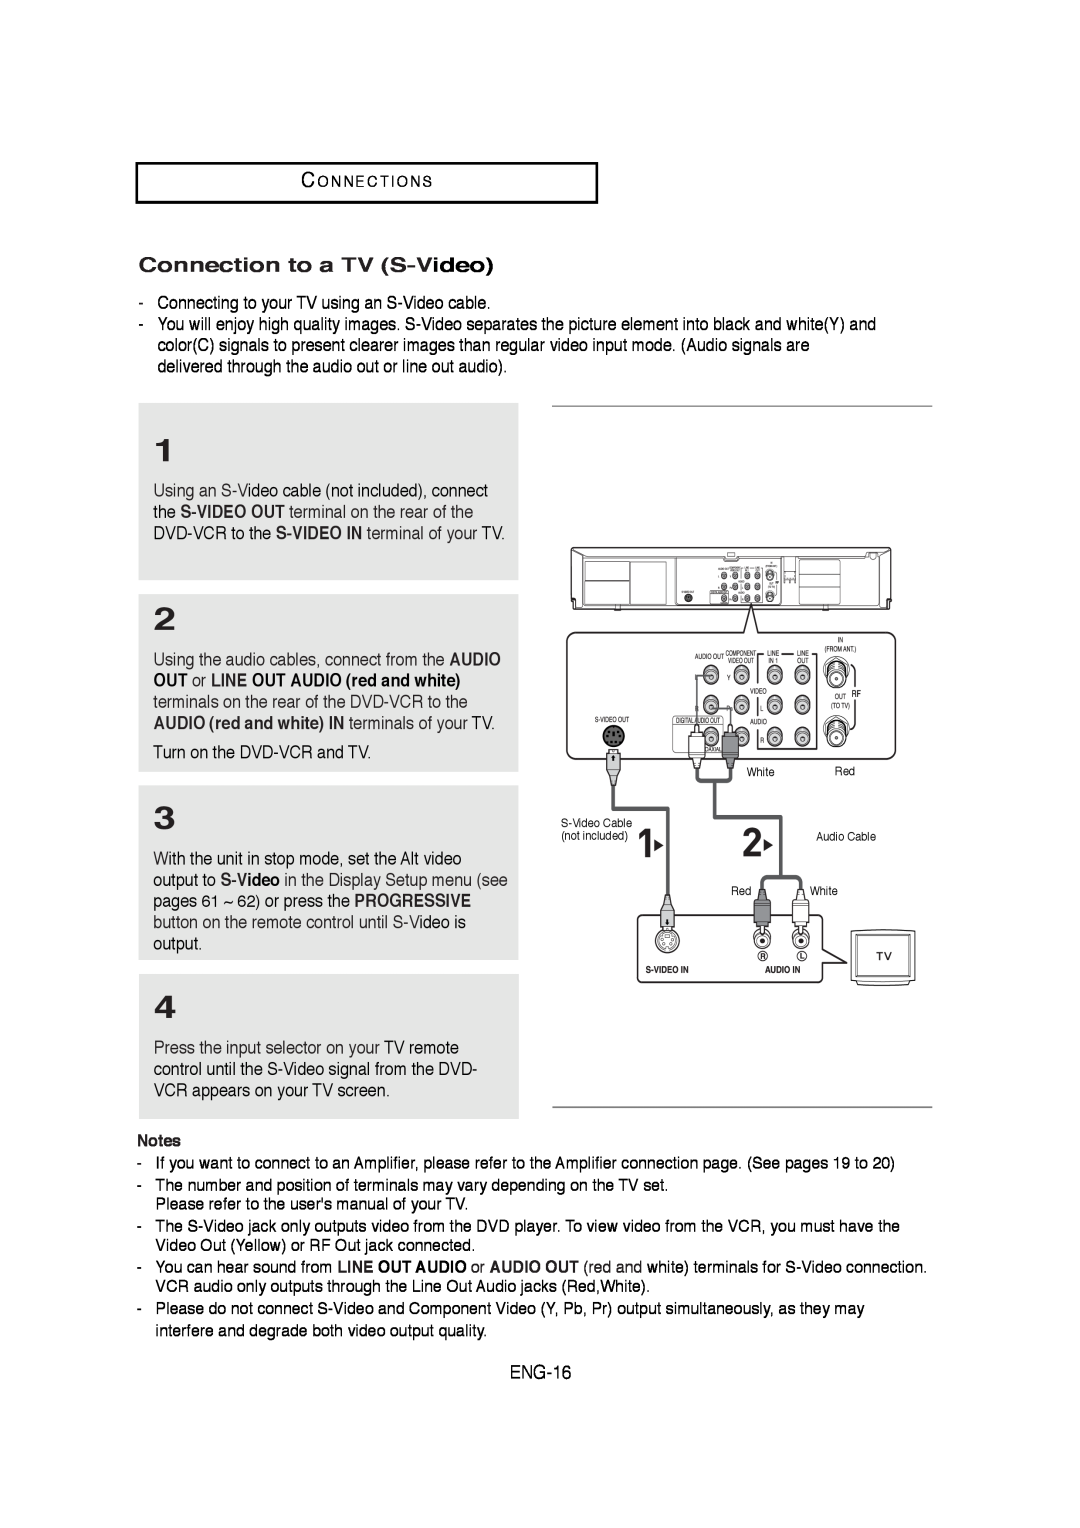 Samsung V6700-XAC, AK68-01304A, 20070205090323359 instruction manual Connection to a TV S-Video, ENG-16 